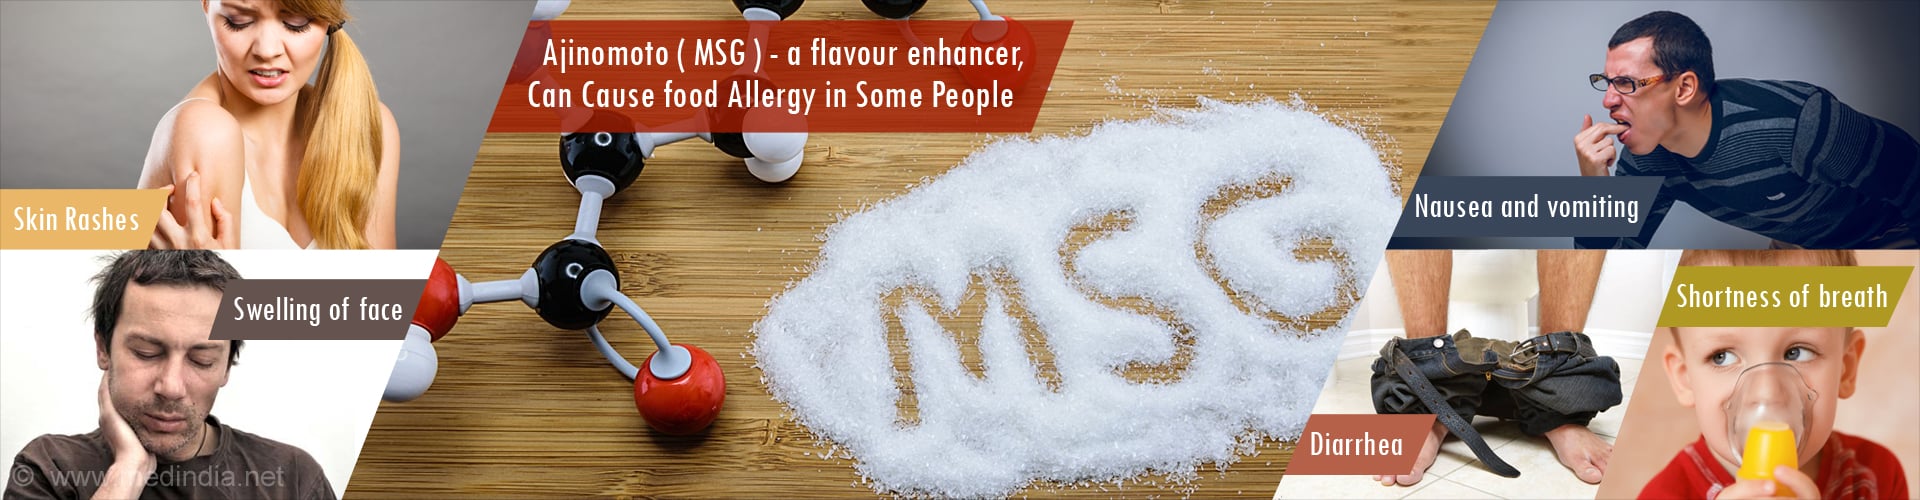 Ajinomoto ( MSG ) - a flavour enhancer,  Can Cause food Allergy in Some People